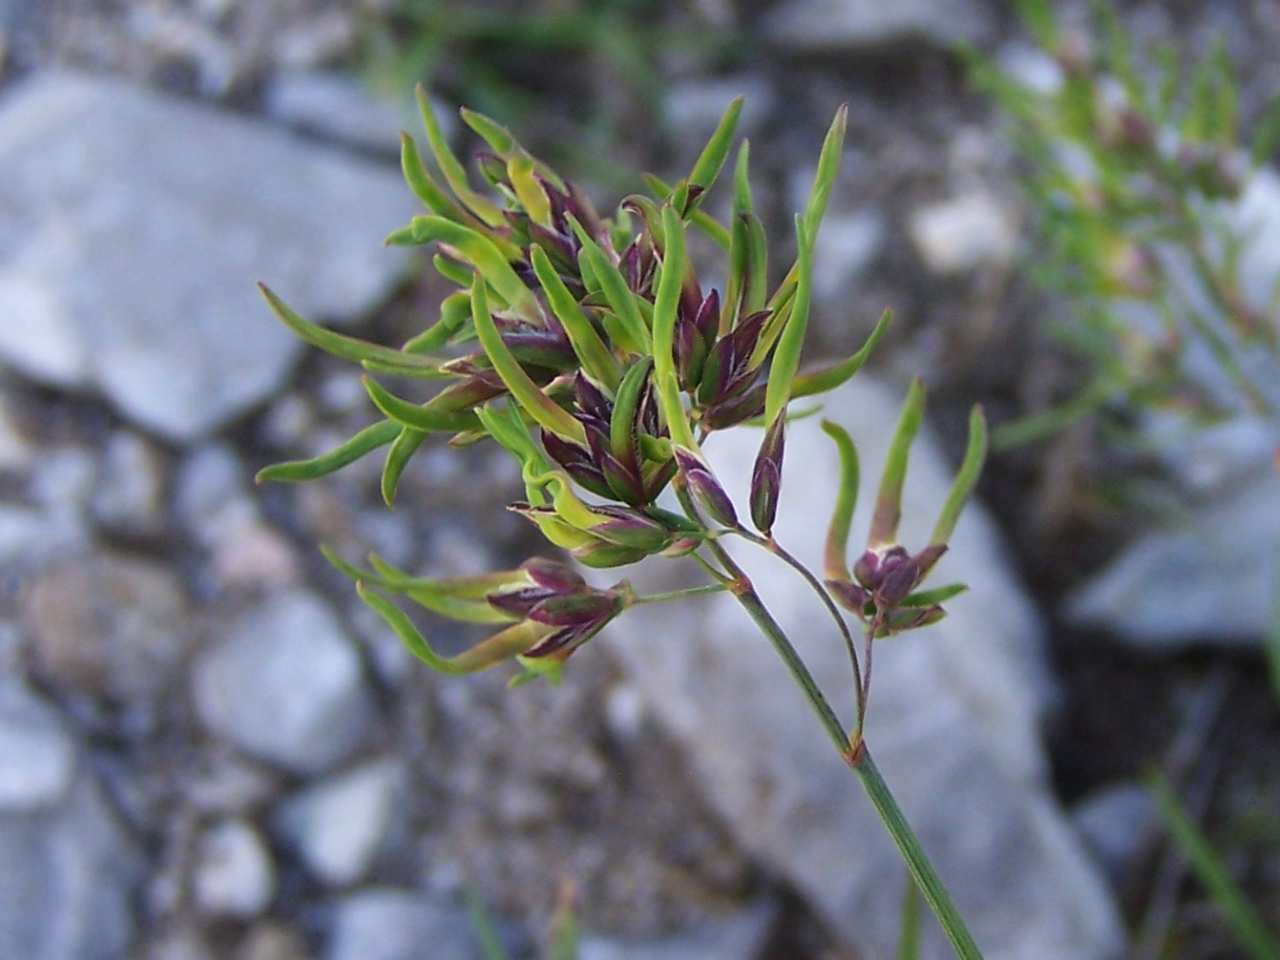 Photograph of the bulbils of alpine bluegrass. The photo shows a branching inflorescence of alpine bluegrass with purple bracts and green, hornlike bulbils extending from between the bracts.